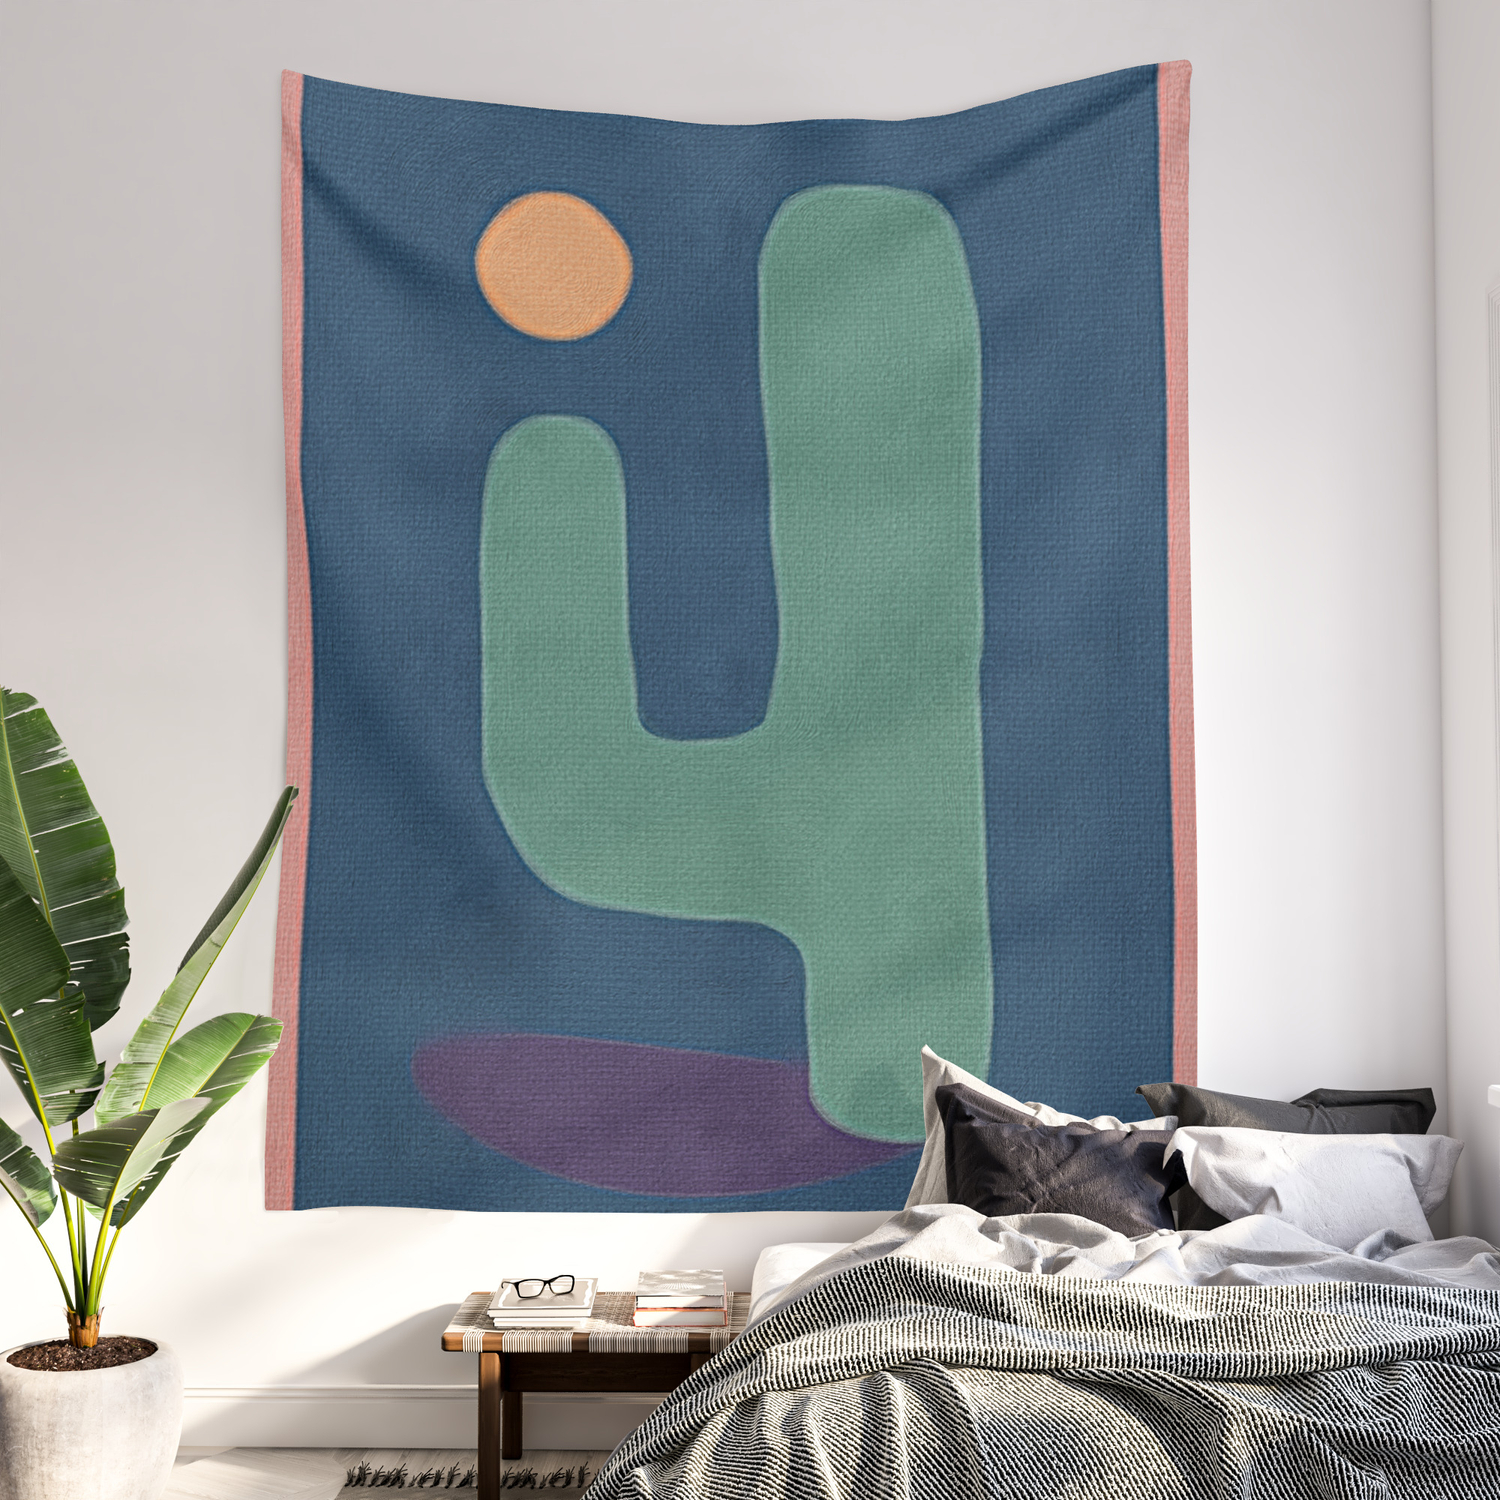 Moon Tapestry Cactus Wall Hanging Print Tapestries Bedspread Throw Home Decor 